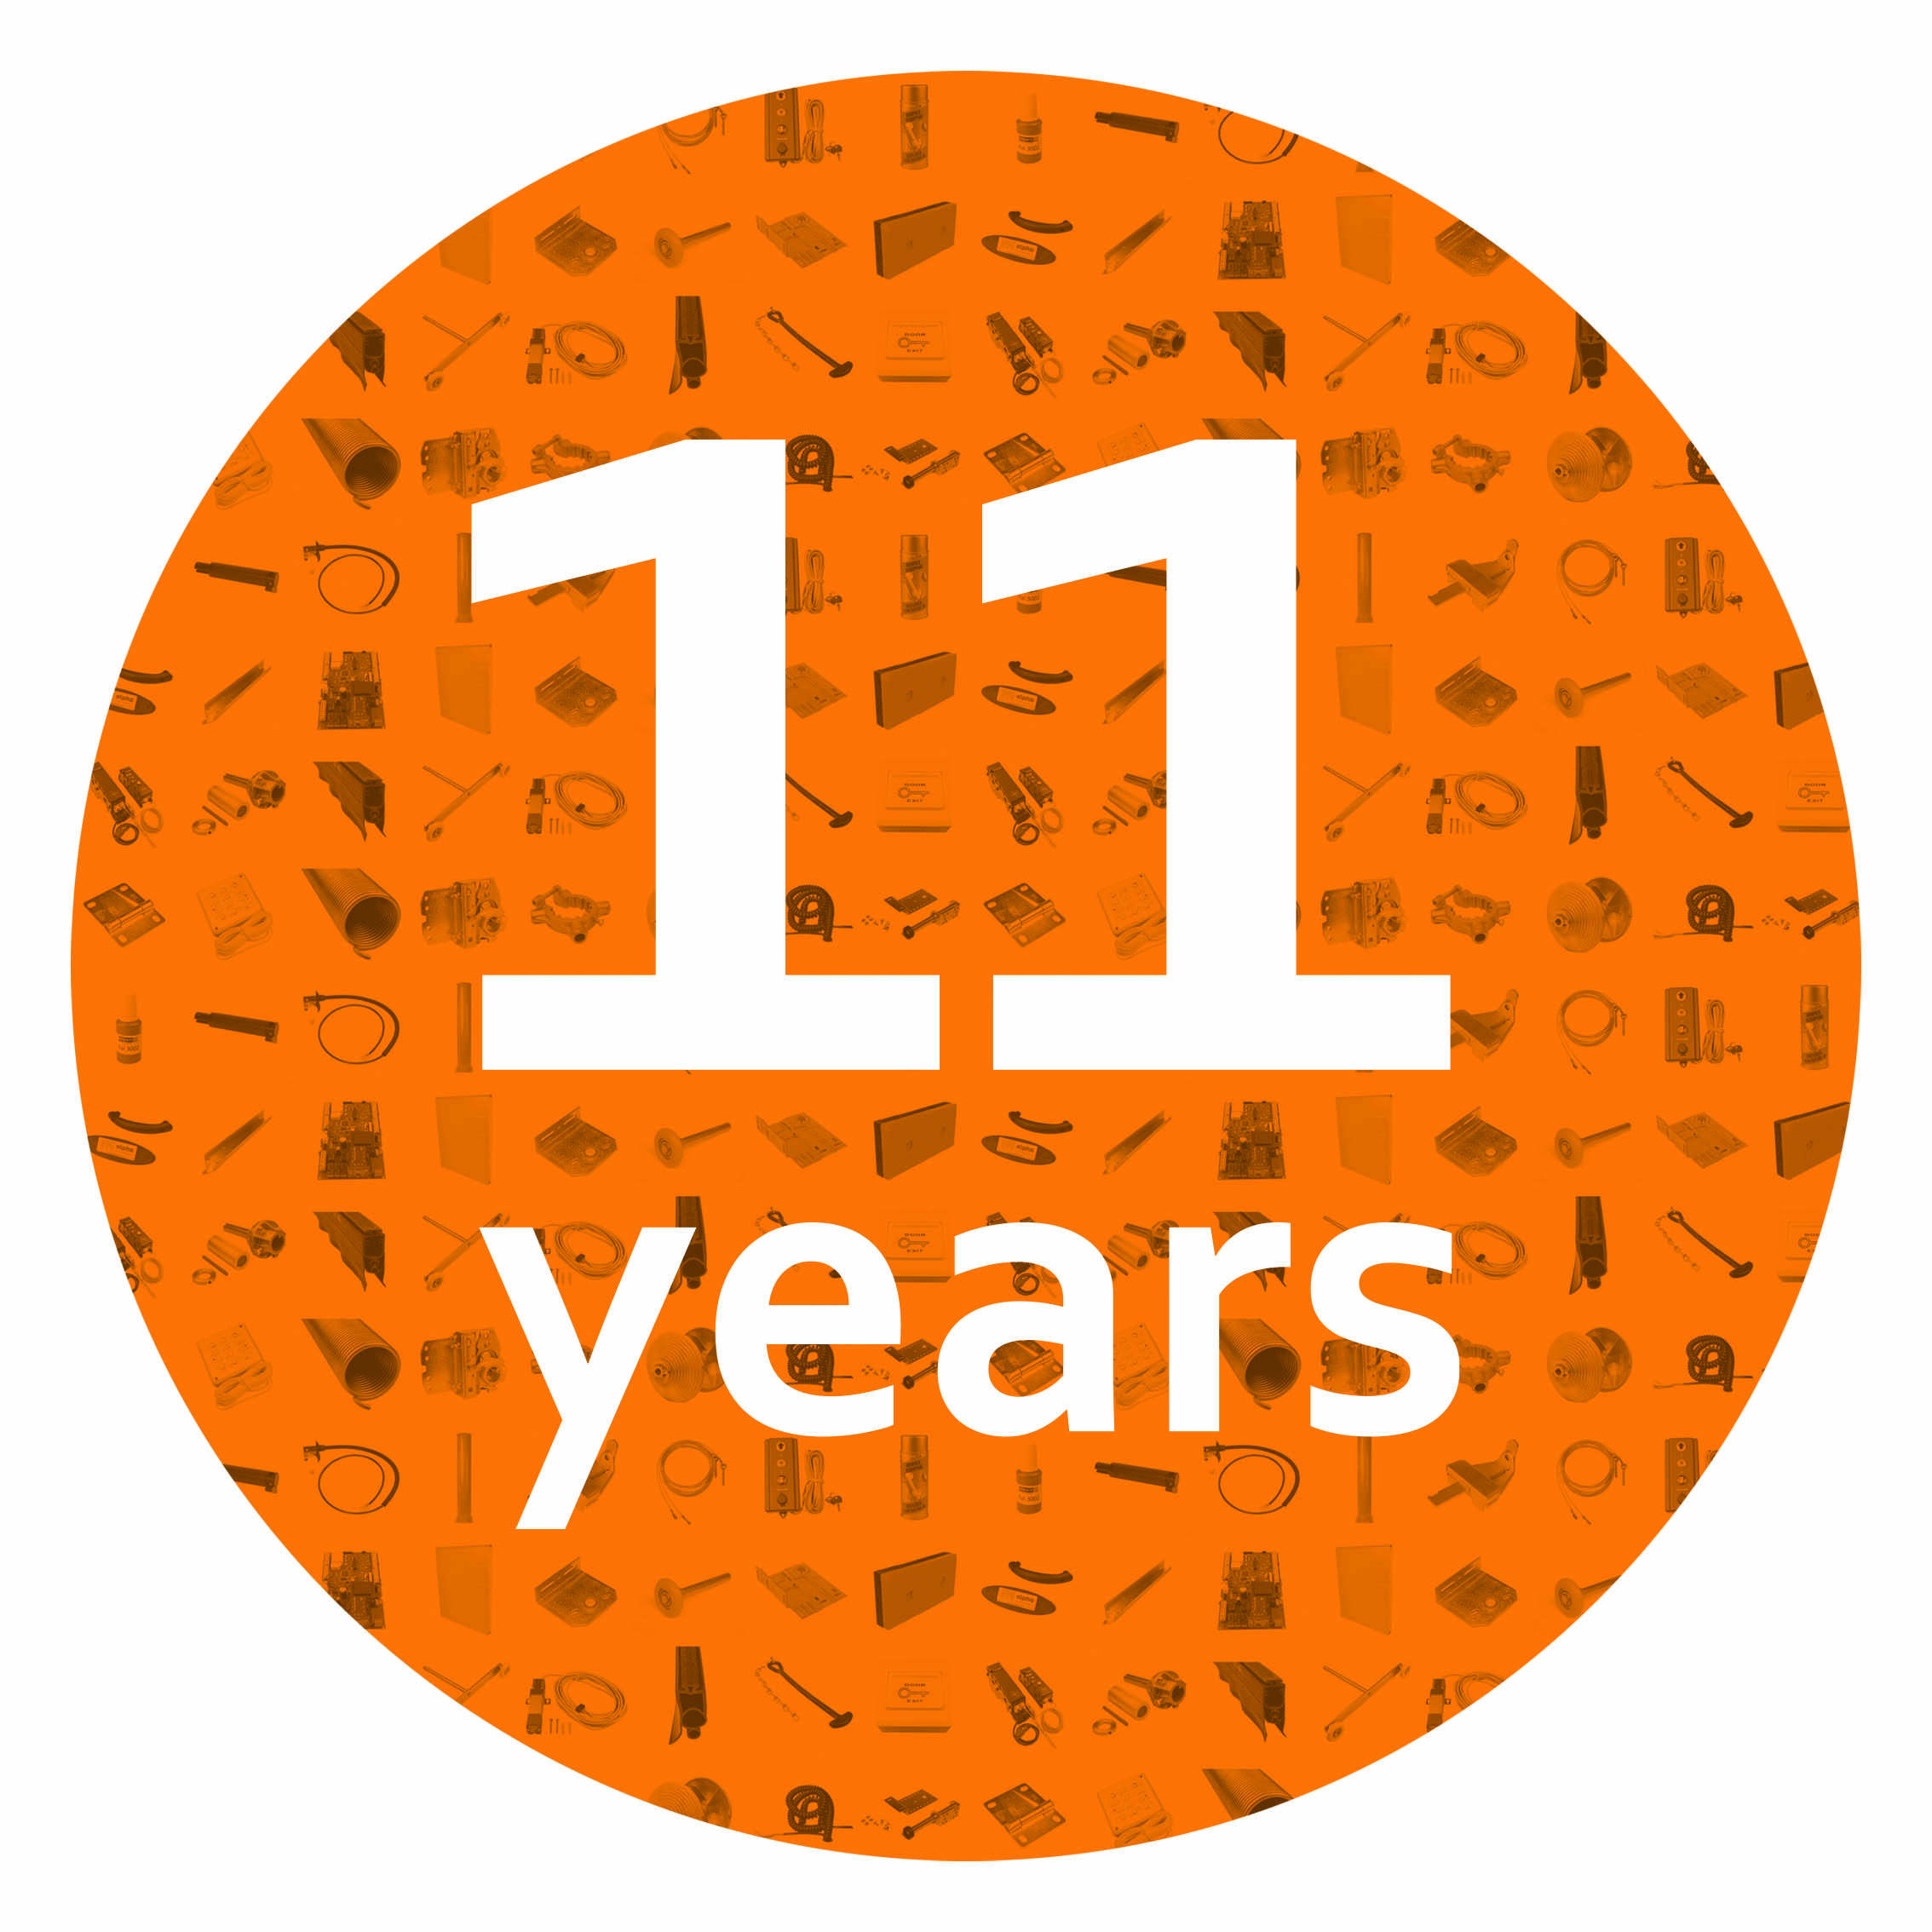 11 years = 11 days with special offers